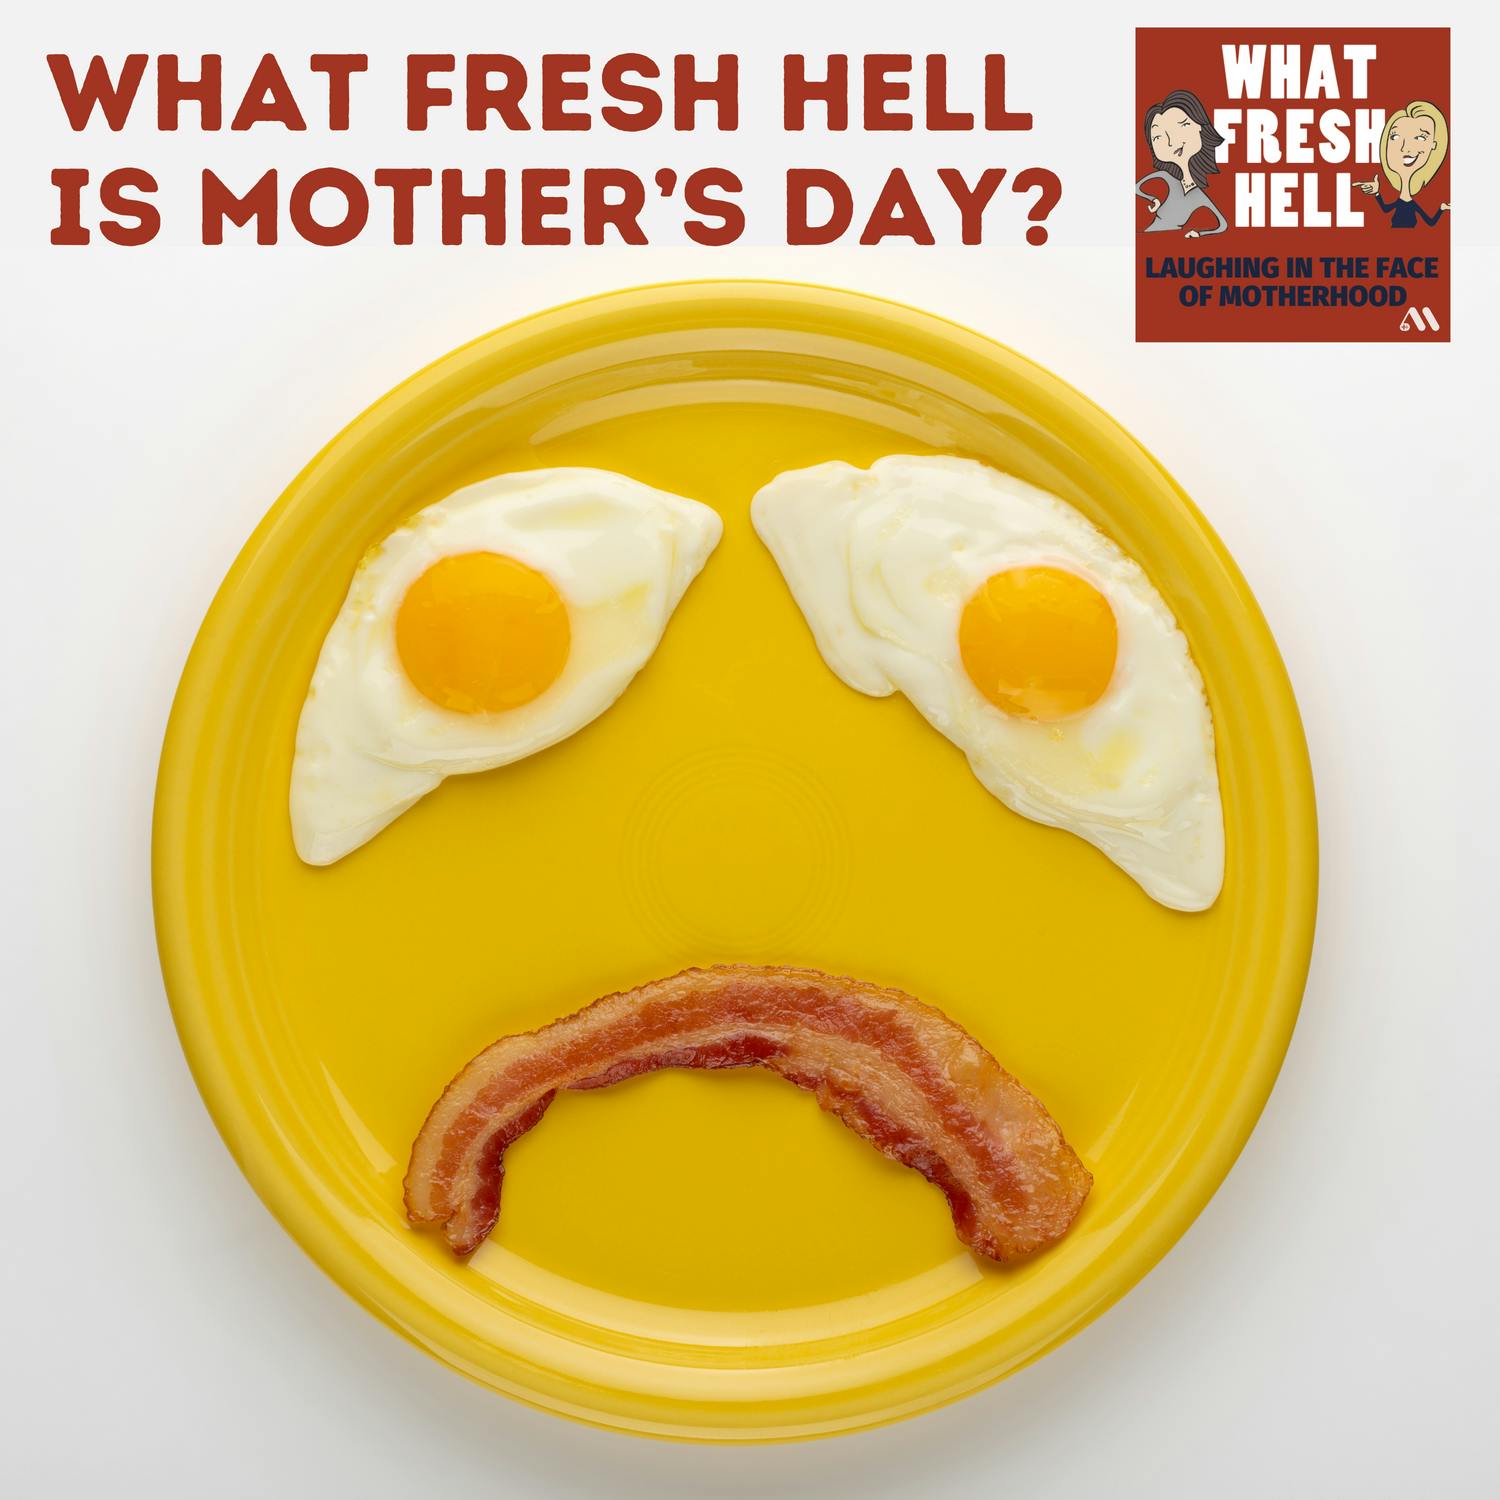 What Fresh Hell Is Mother's Day?